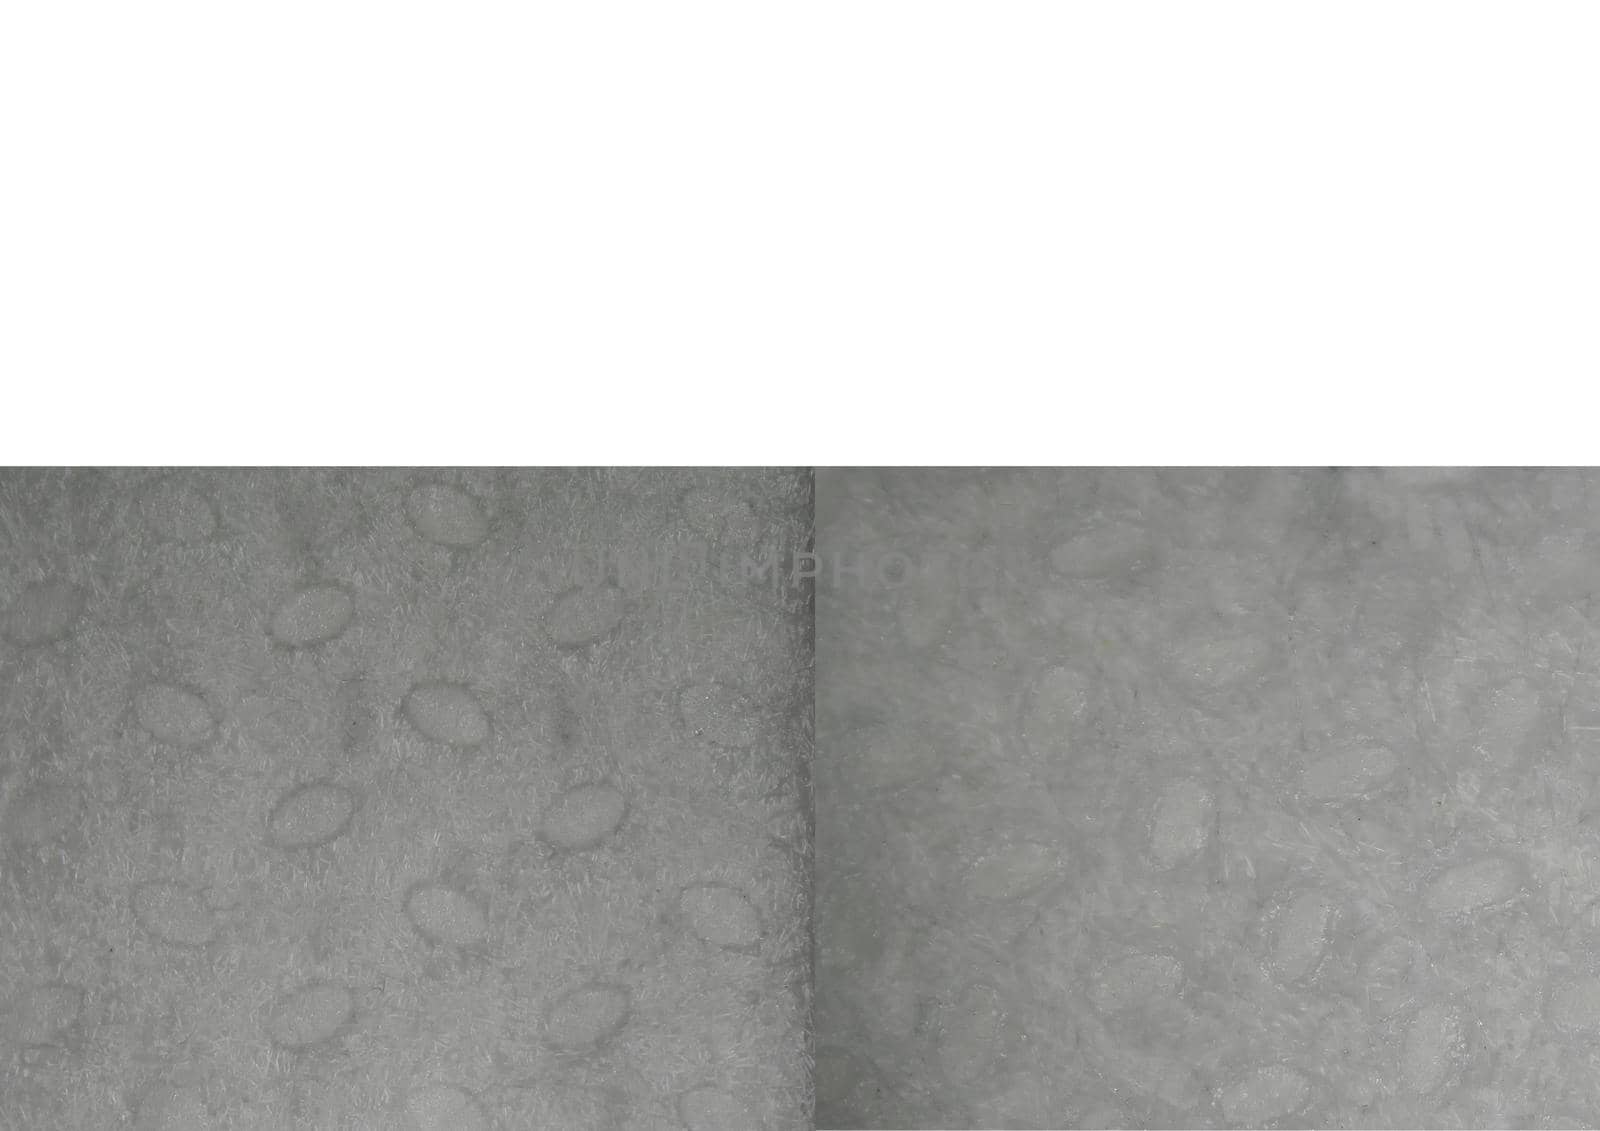 medical face mask, microscopic view of the tissues, left face mask, right FFP2 mask